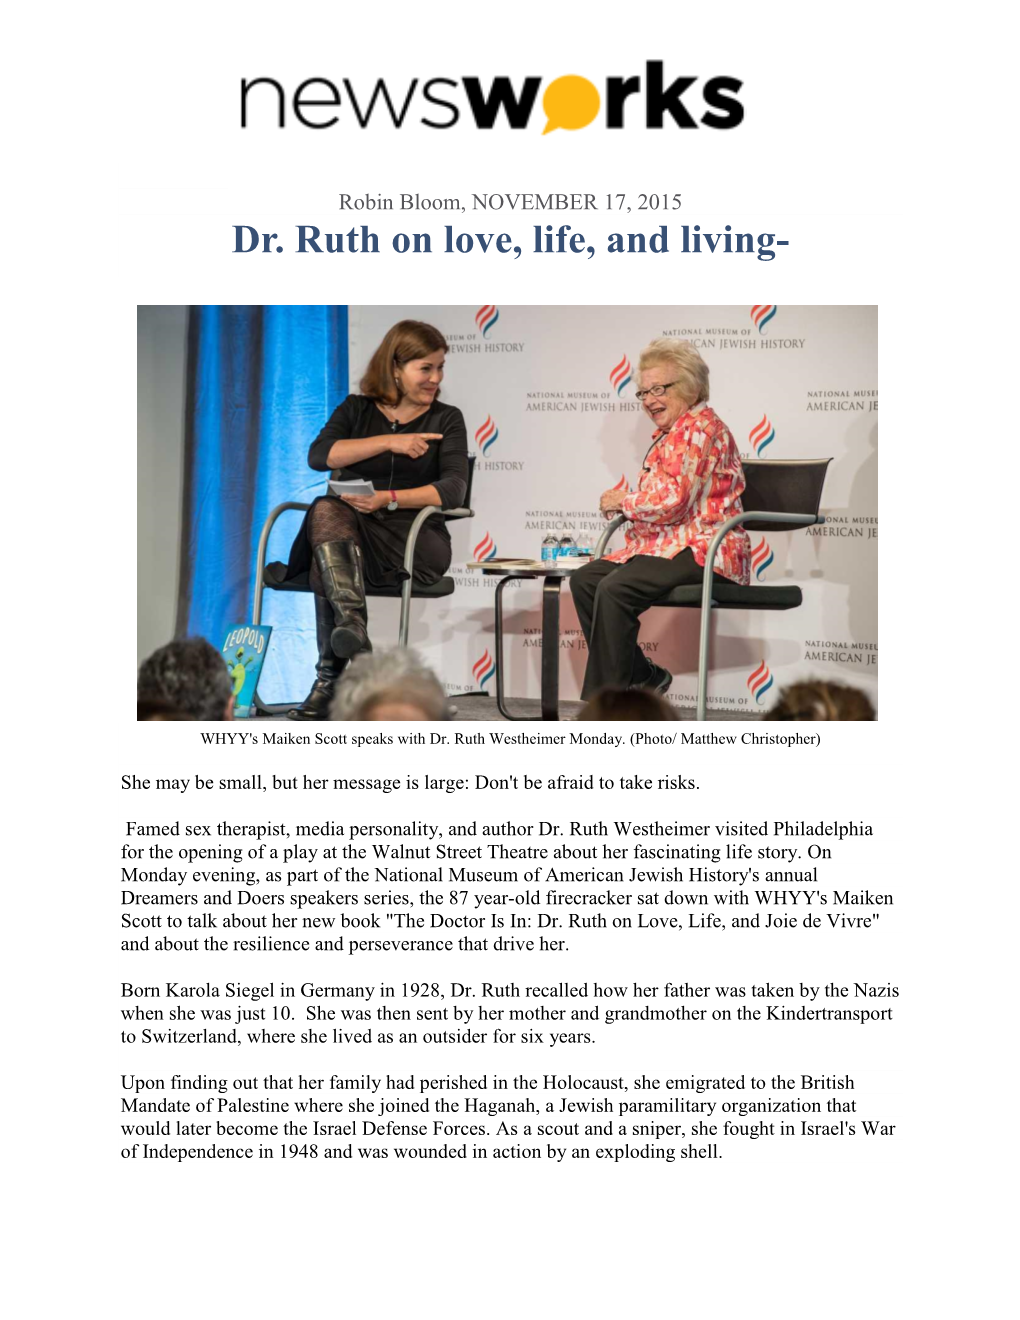 Dr. Ruth on Love, Life, and Living